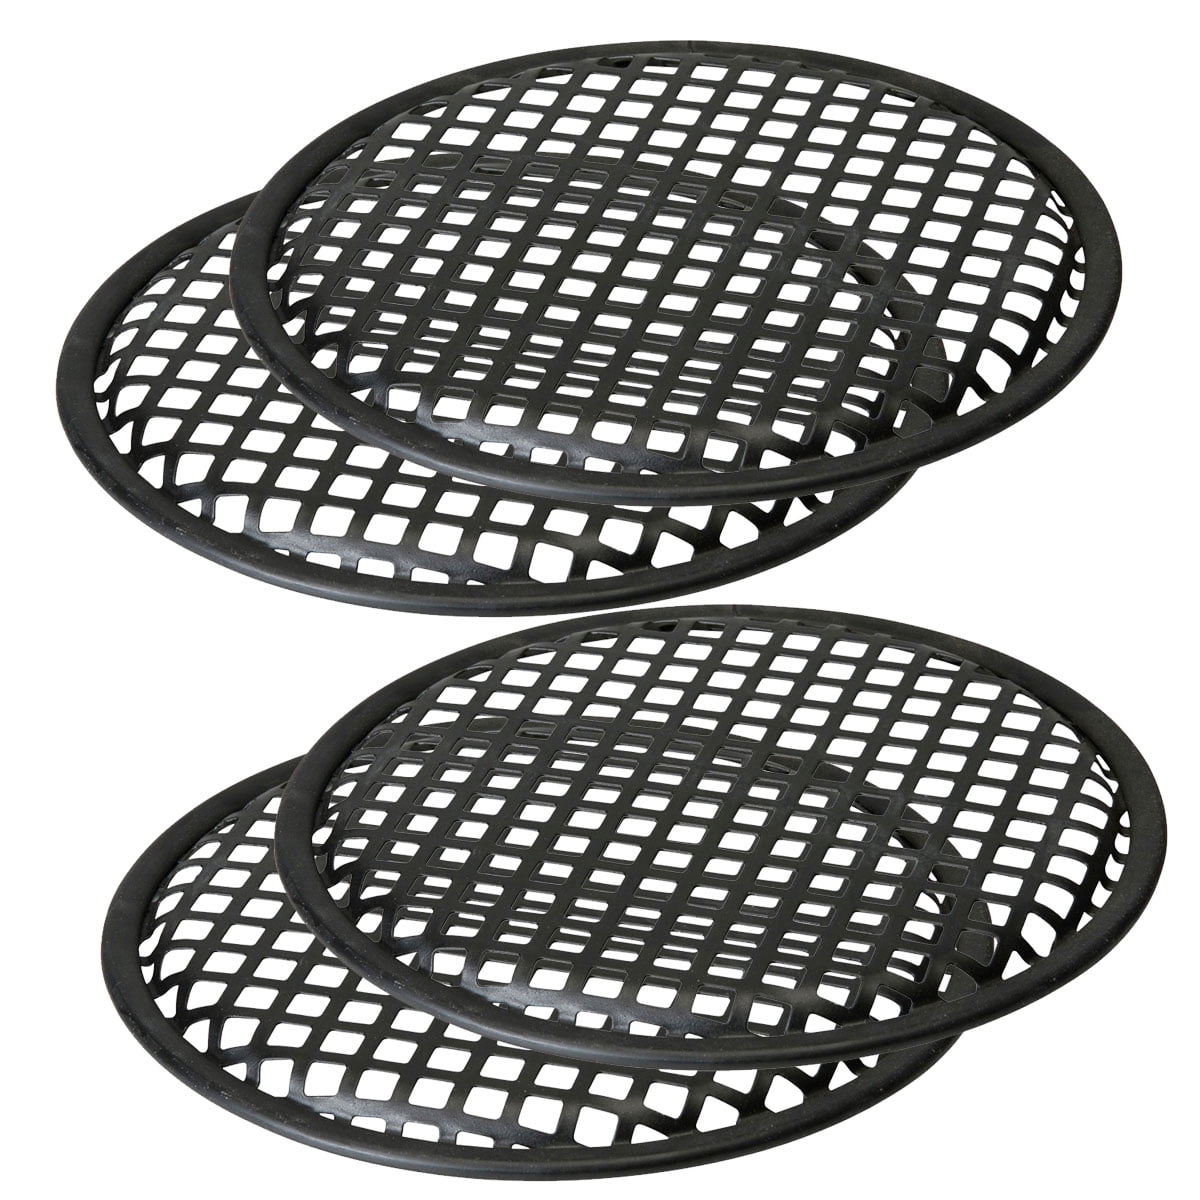 10" UNIVERSAL 2-PIECE STEEL METAL MESH SPEAKER GRILL with RING #MGR10 